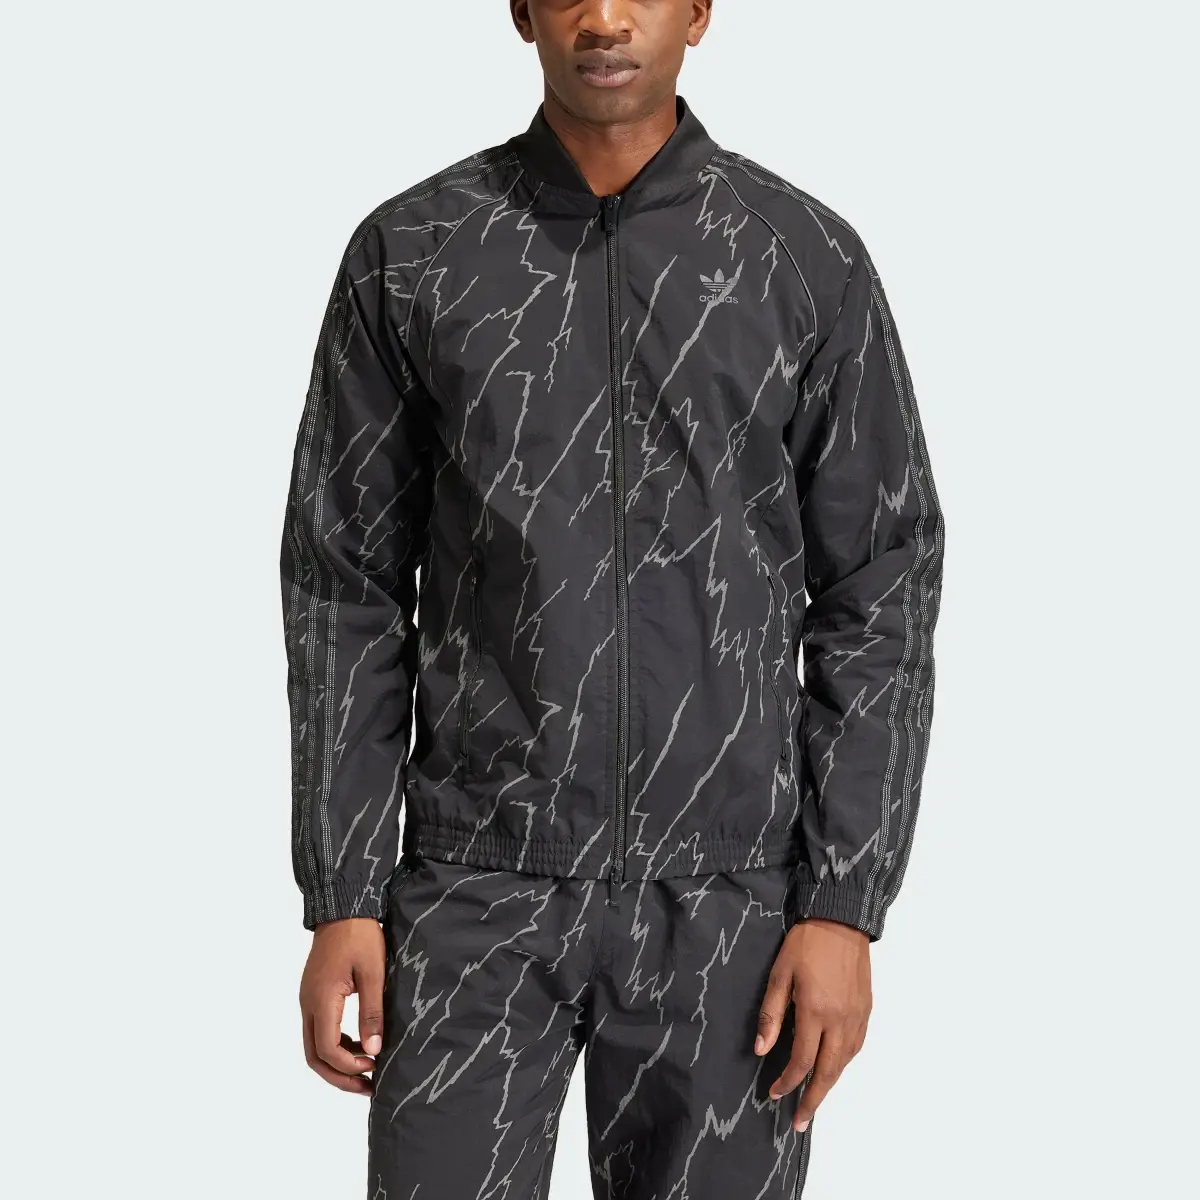 Adidas Track top Allover Print SST. 1